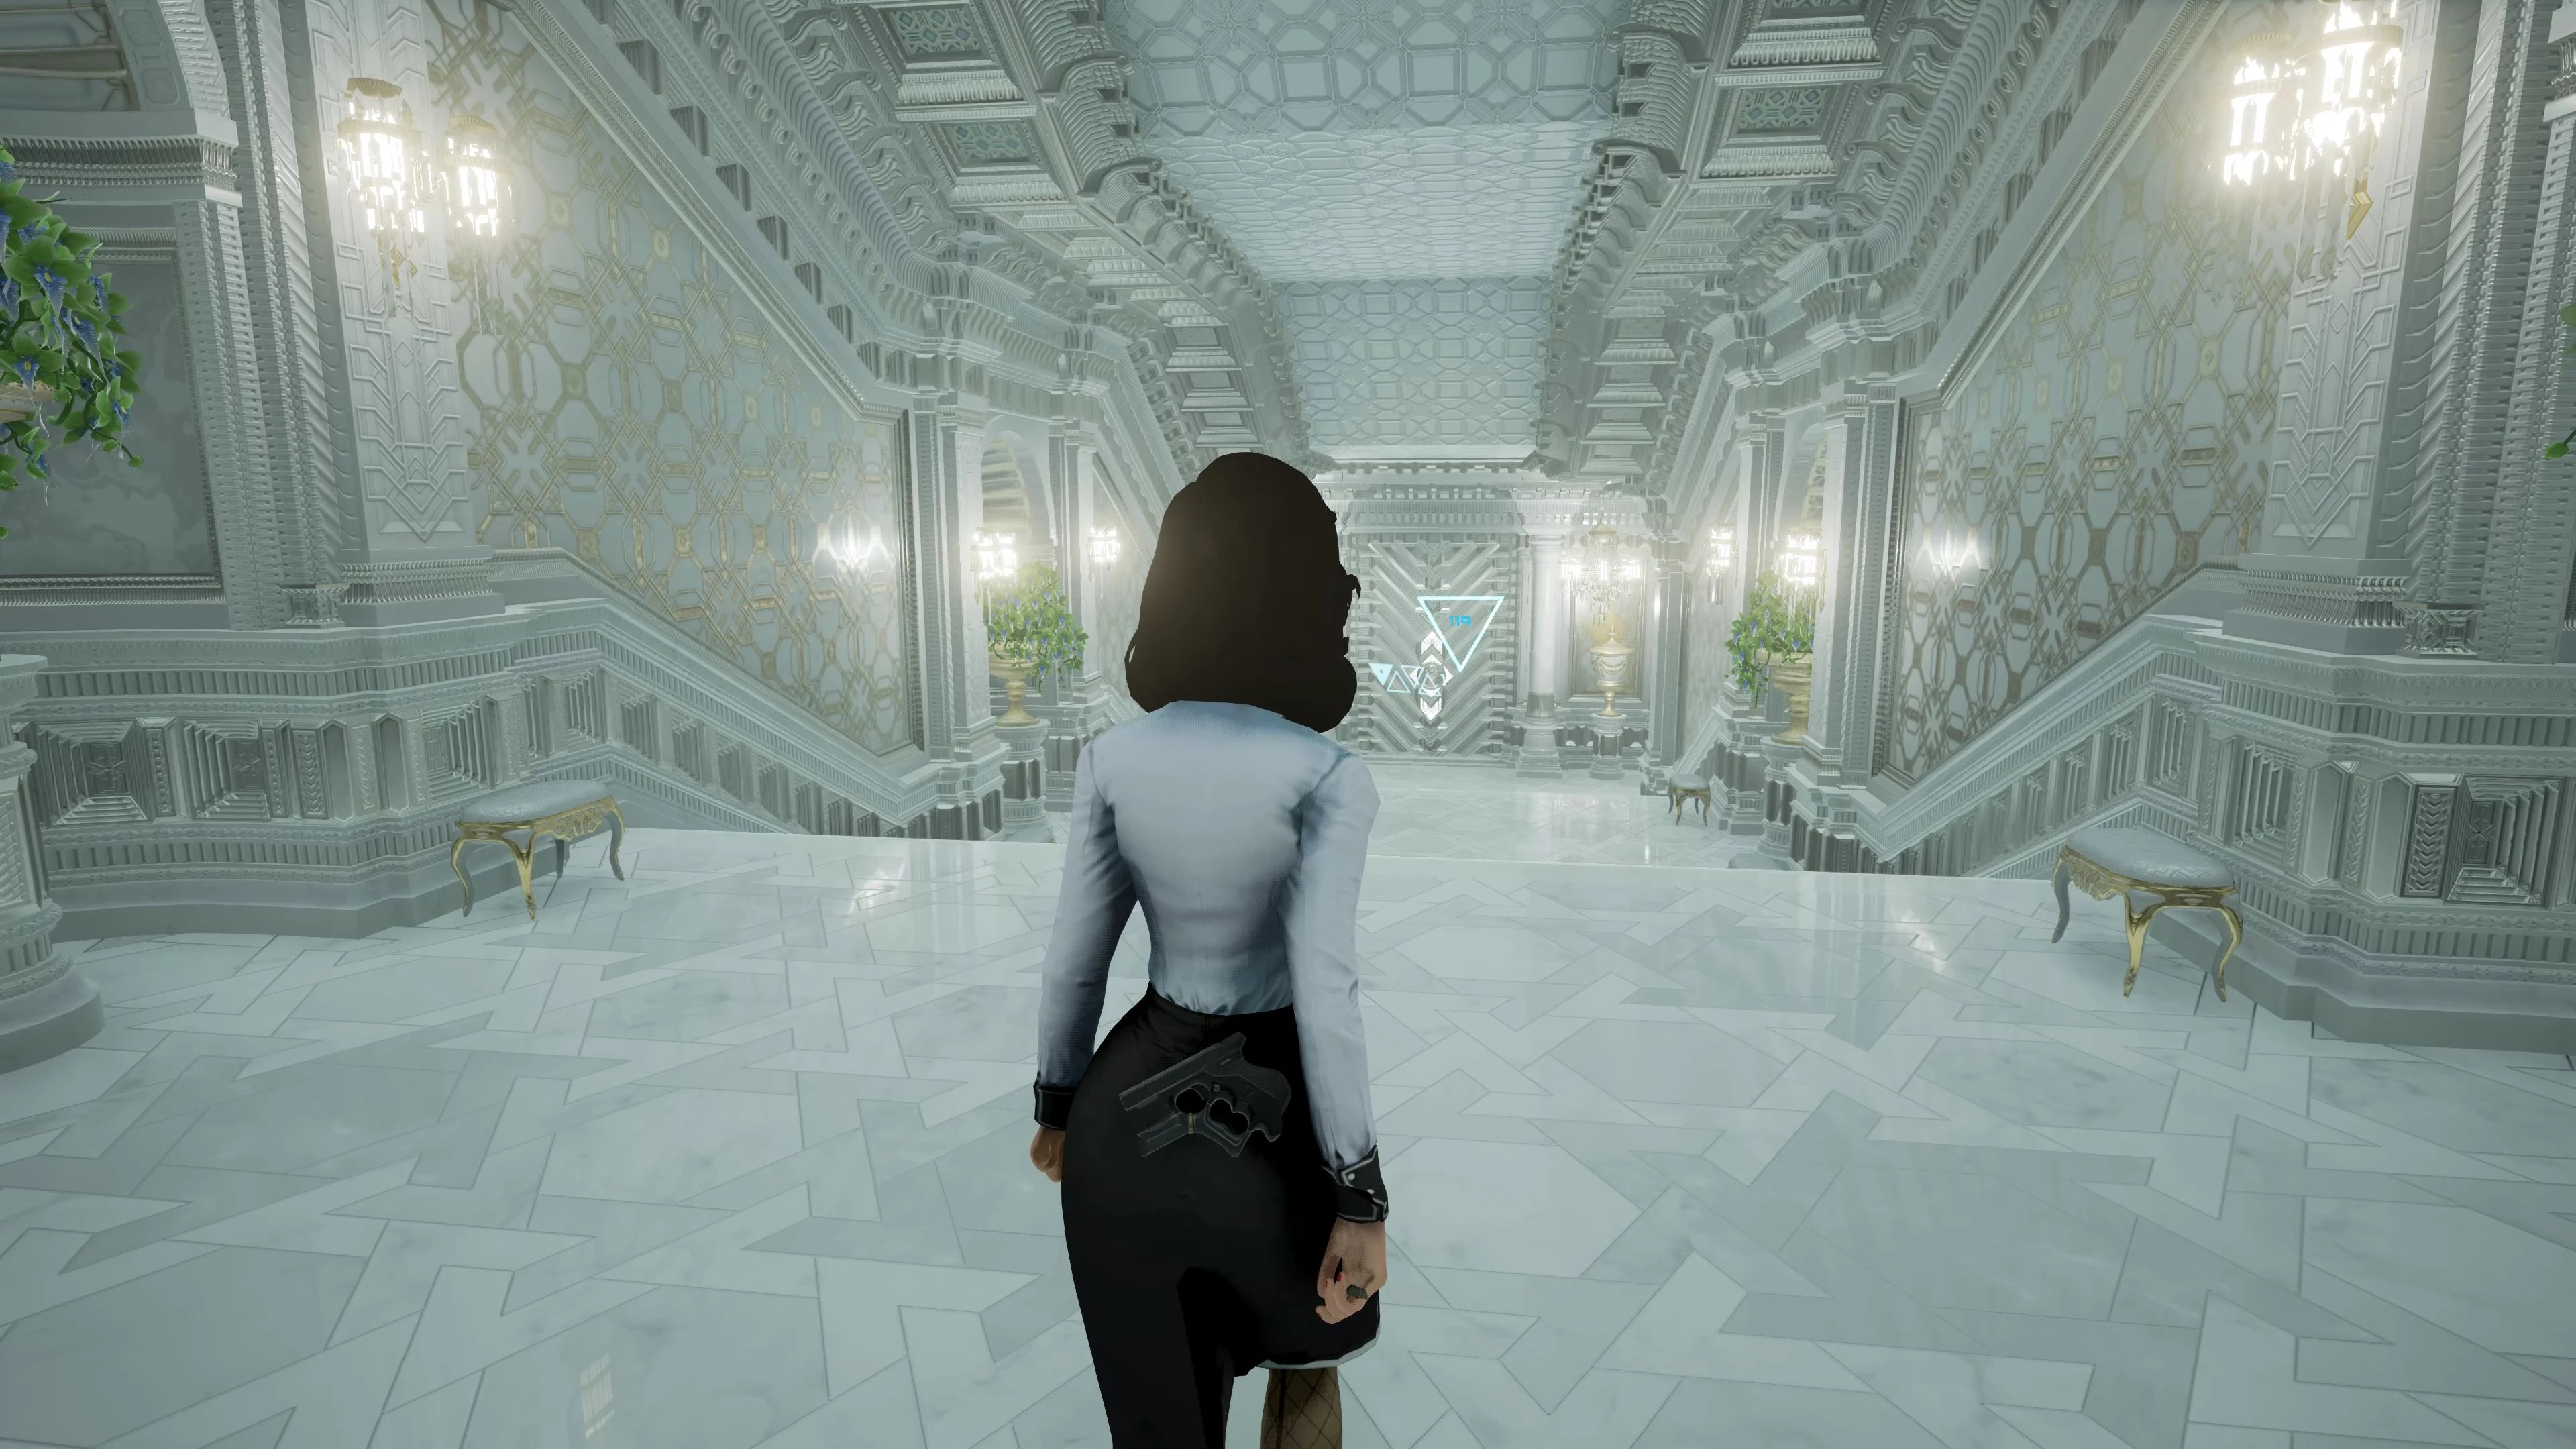 BioShock Infinite Burial at Sea Elizabeth Mod at Remnant: From the Ashes  Nexus - Mods and community